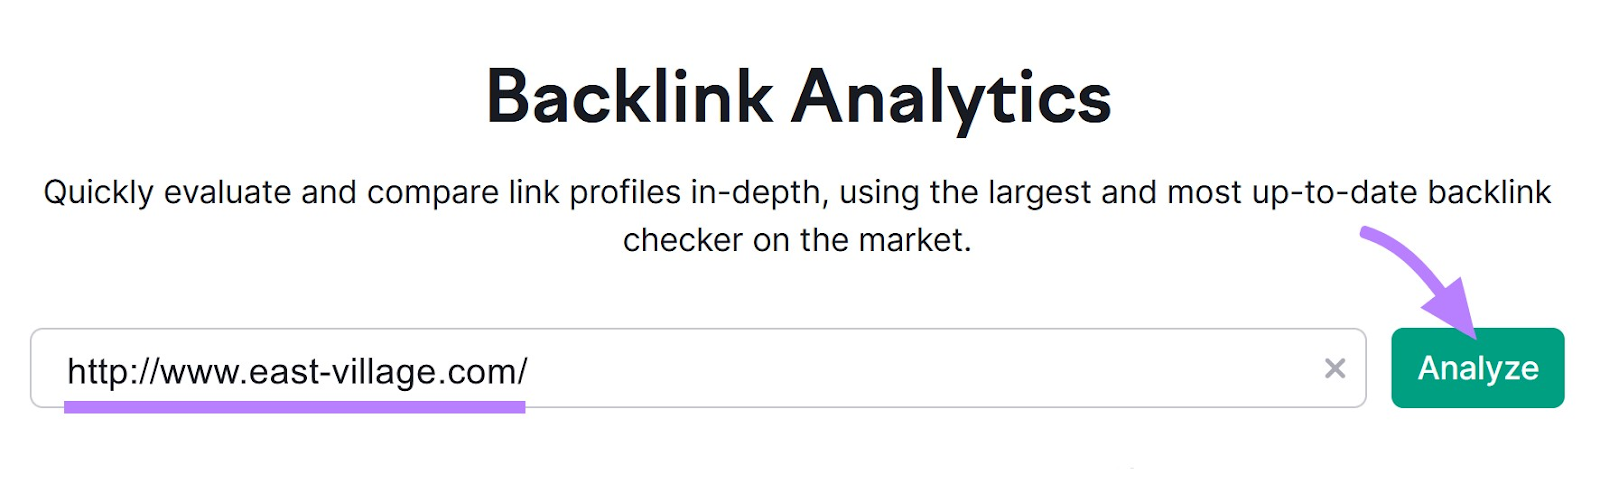 Backlink Analytics tool with "http://www.east-village.com/" in a search bar and "analyze" button highlighted